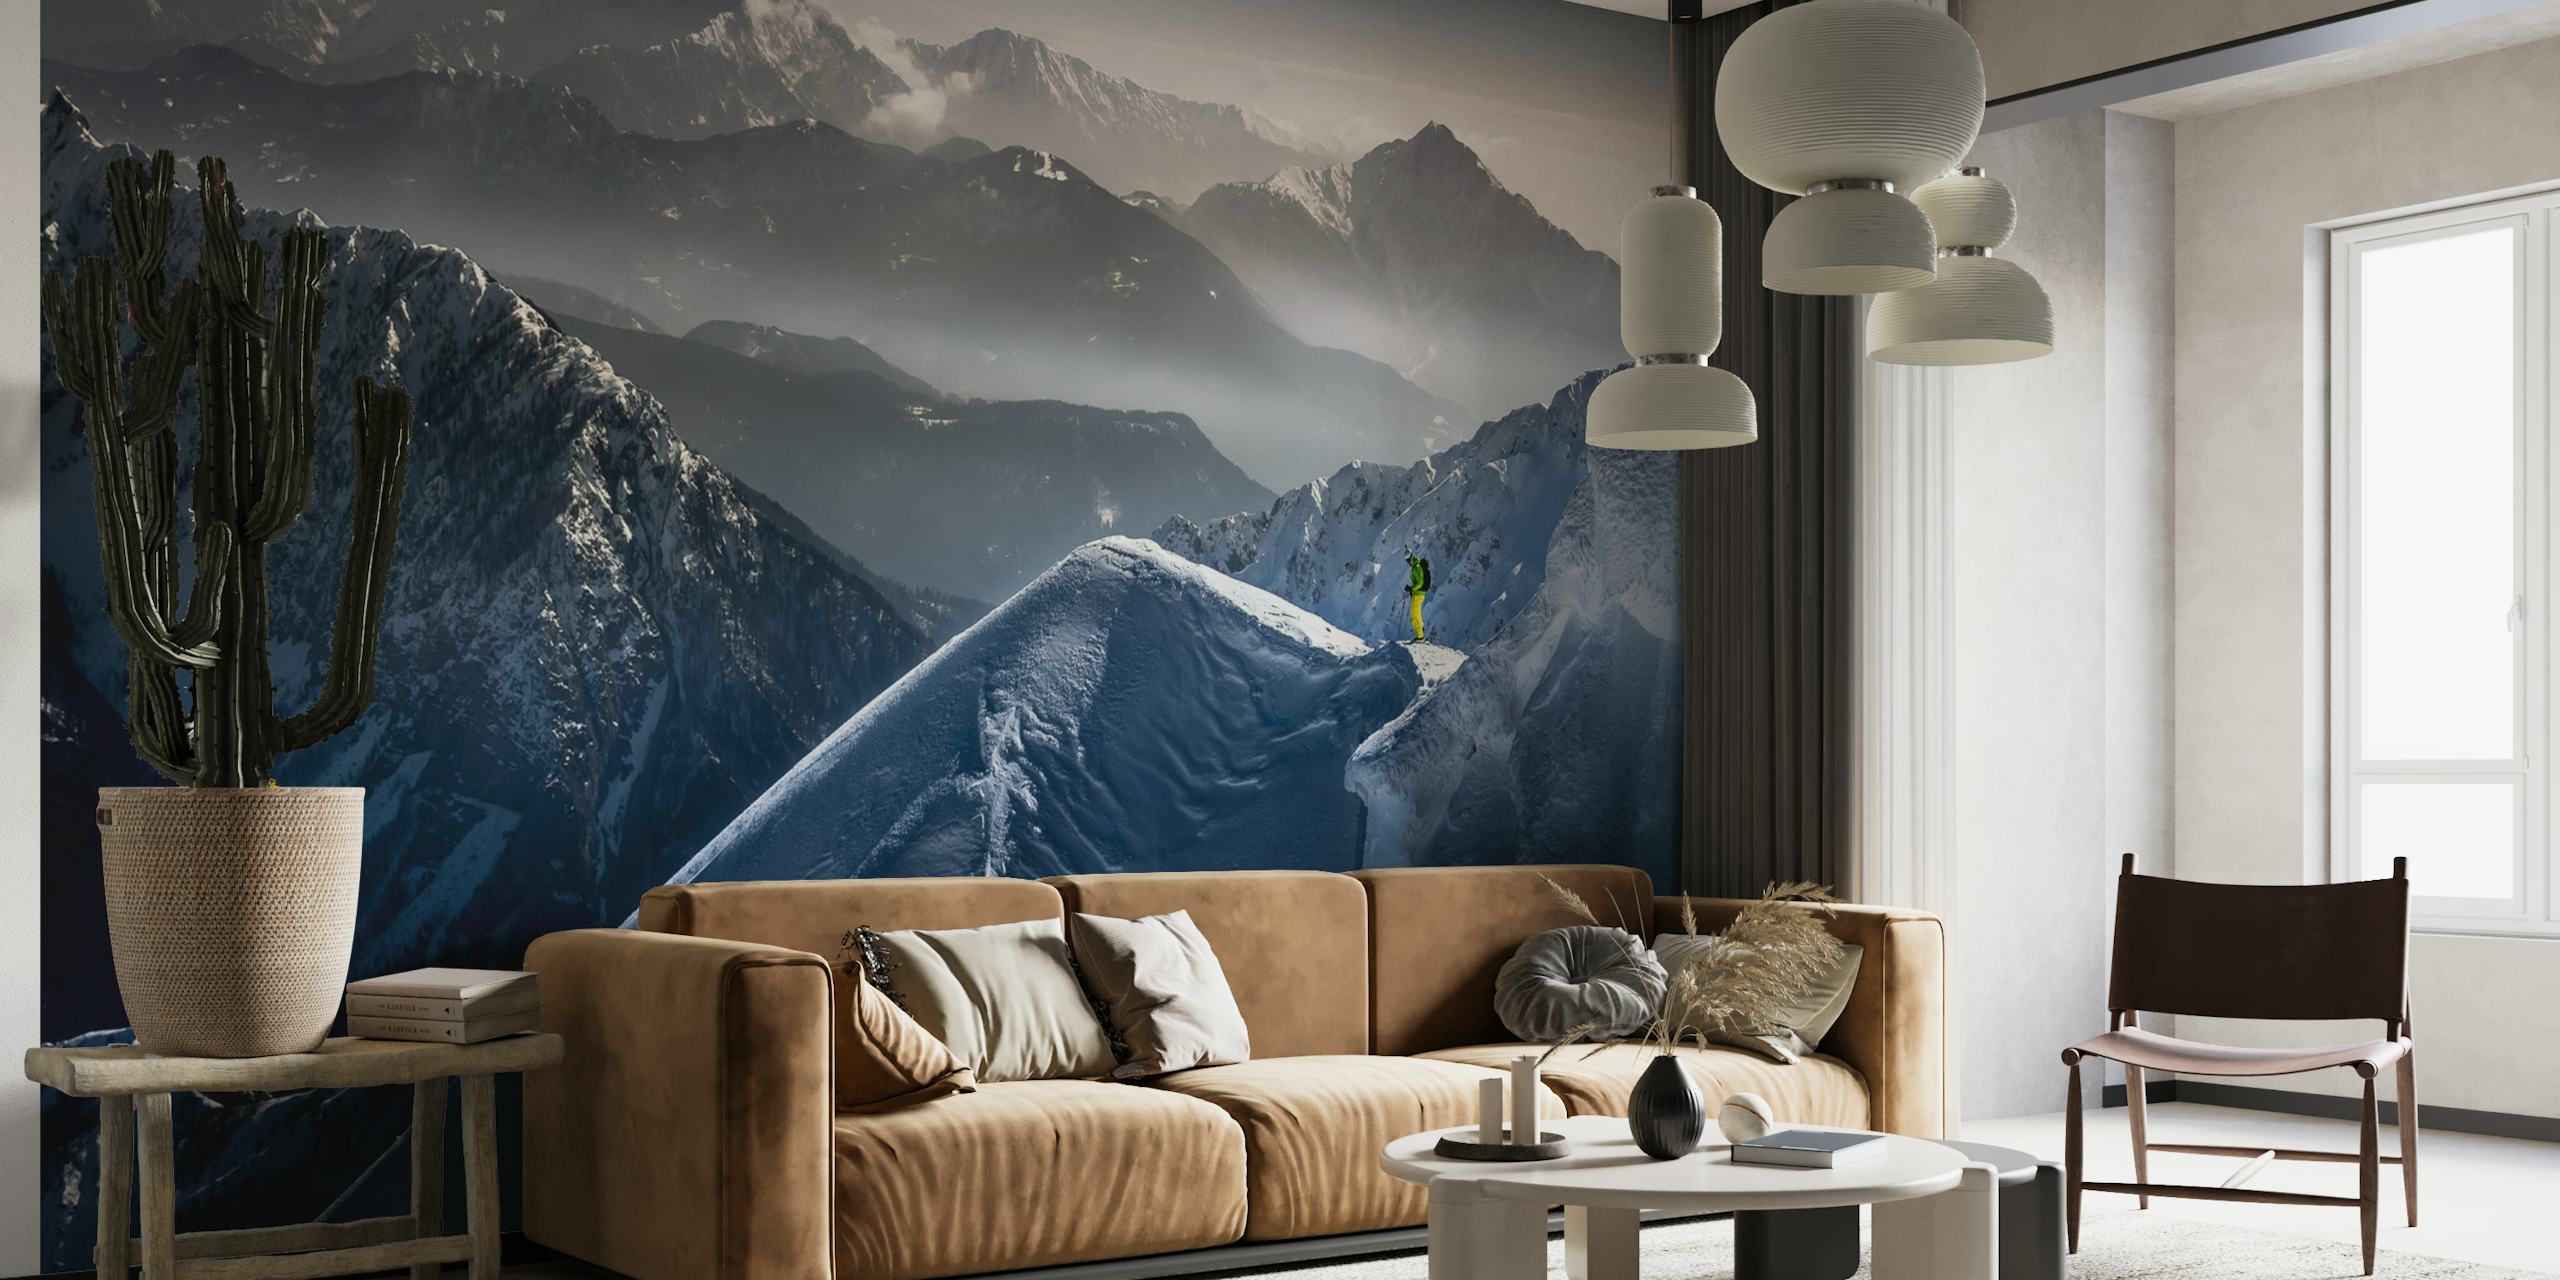 Skier on mountain peak wall mural 'Silence before Descent' with misty mountain backdrop